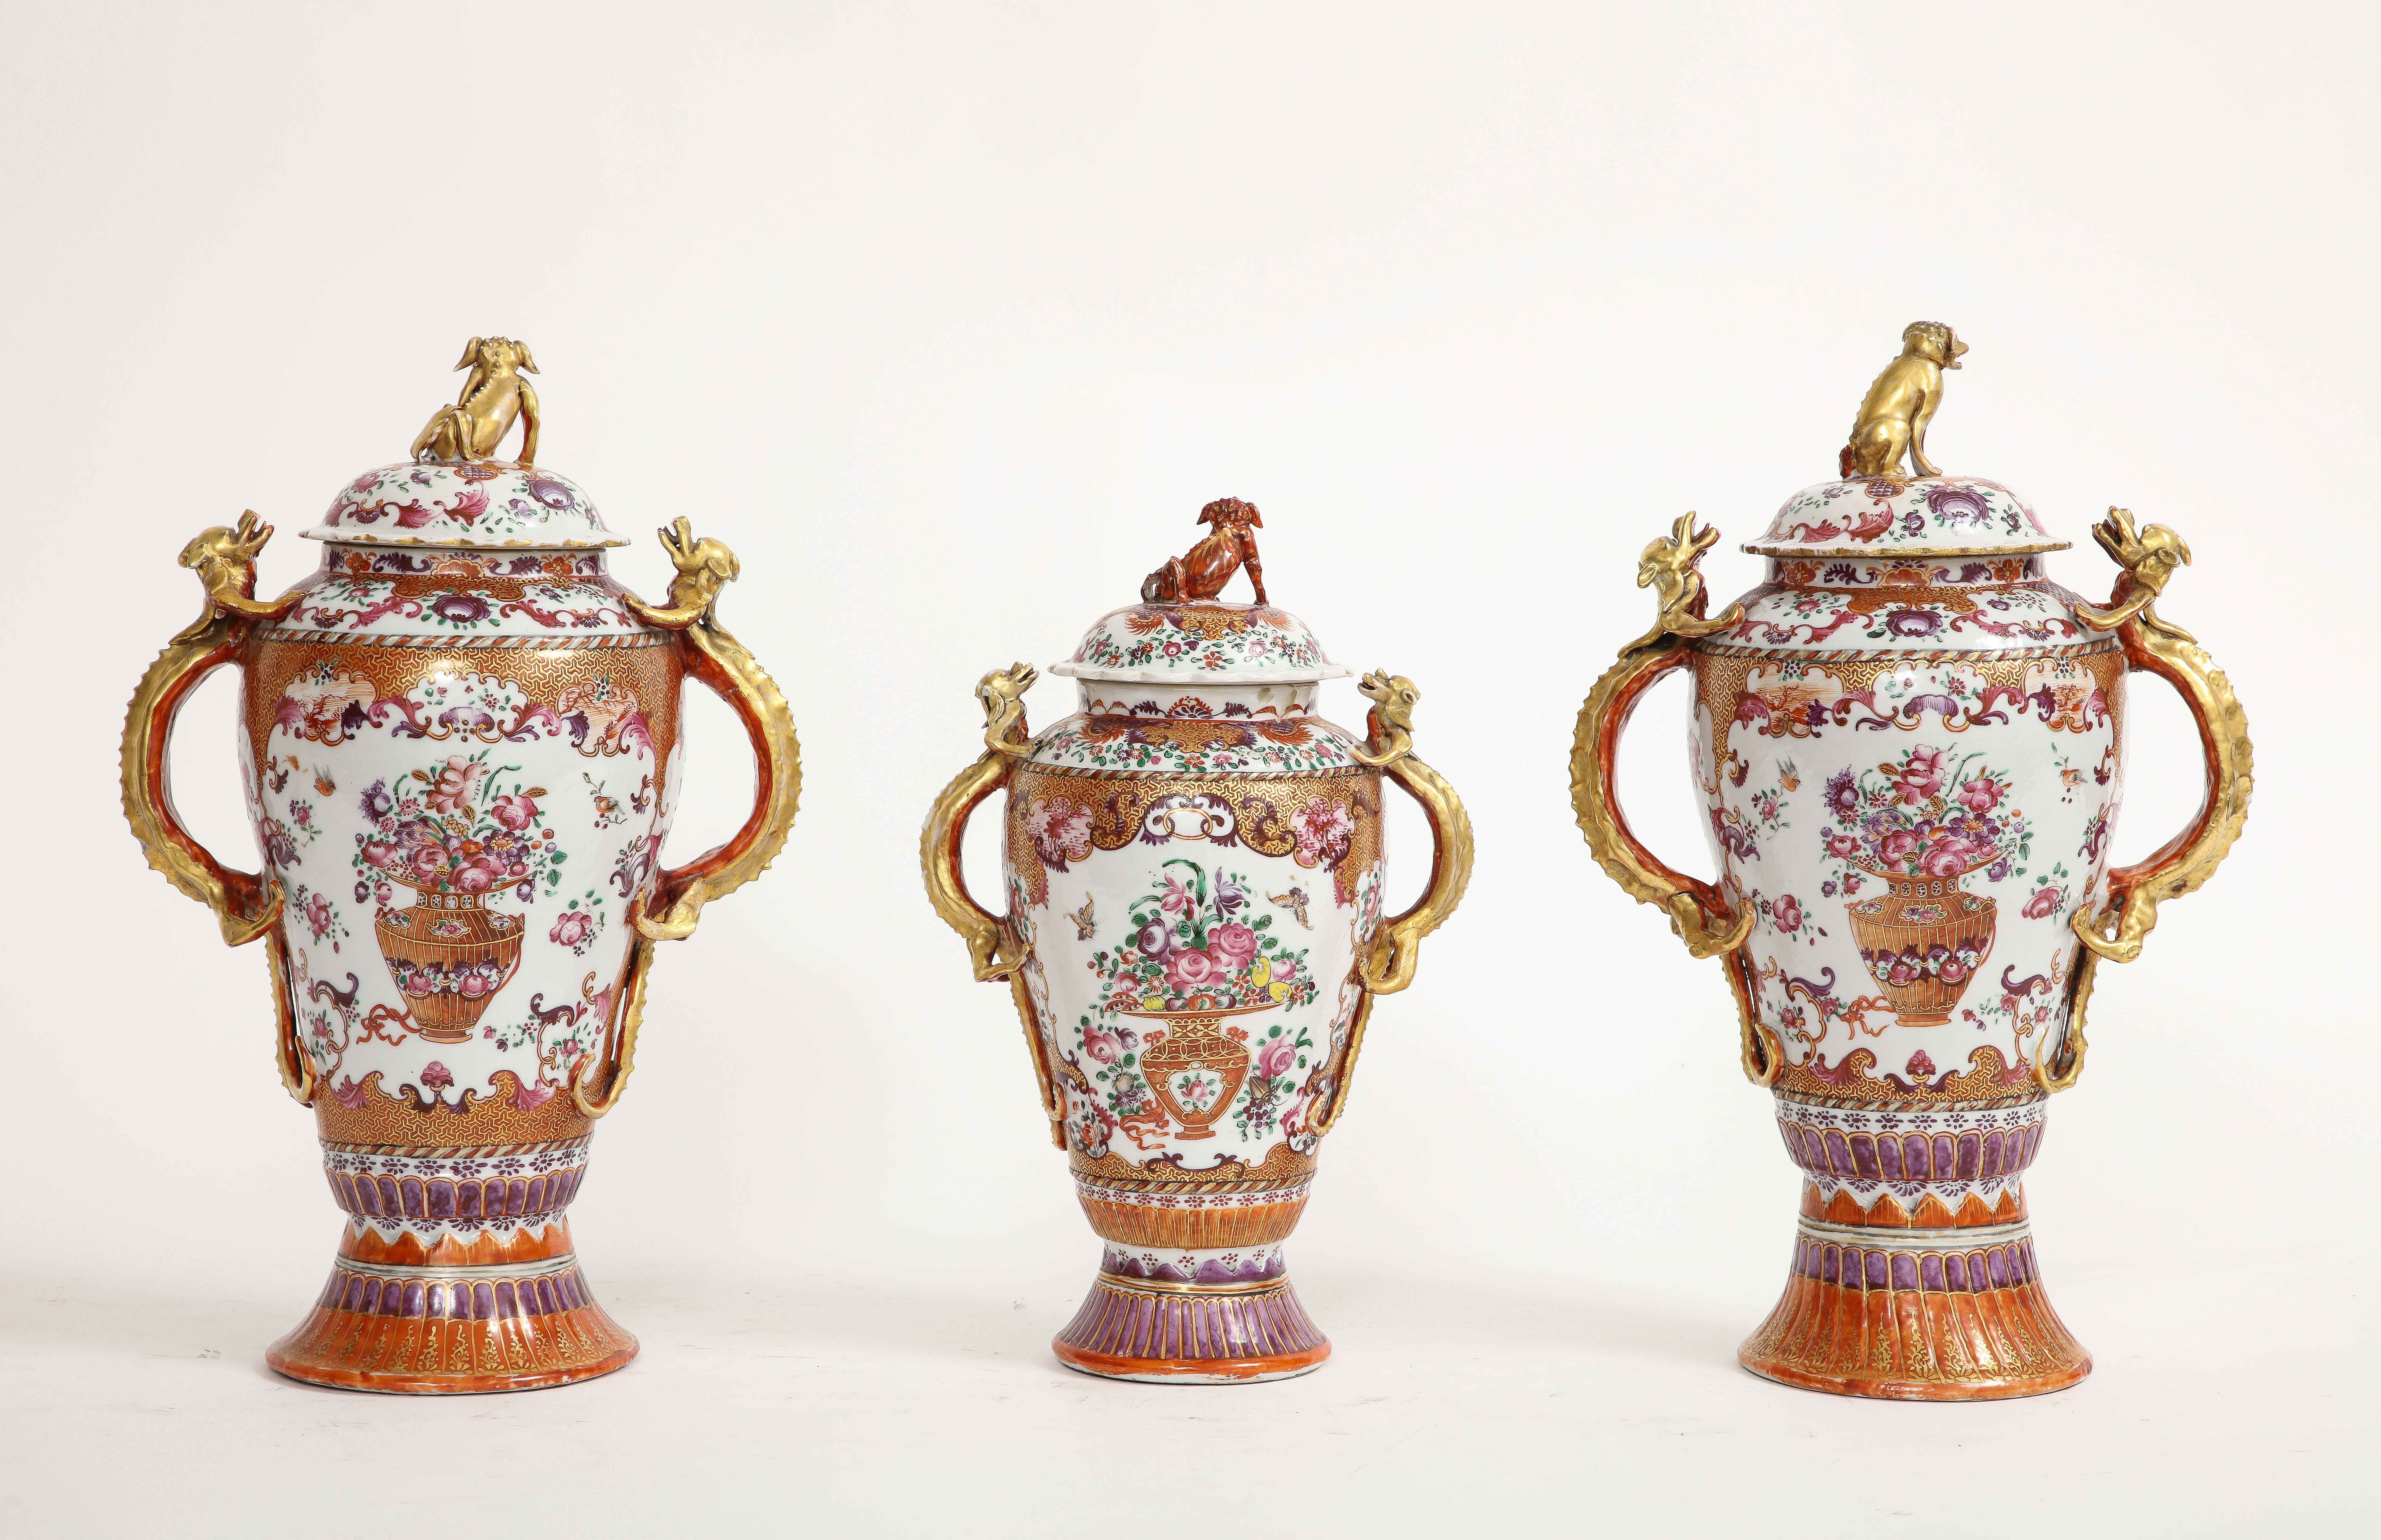 An 18th century Chinese Porcelain Famille Rose Mandarin 3-Piece vase Garniture Set. A status symbol between the 17th and 19th centuries, most garniture sets have by now been damaged or broken up with the individual pieces sold off. Few complete sets